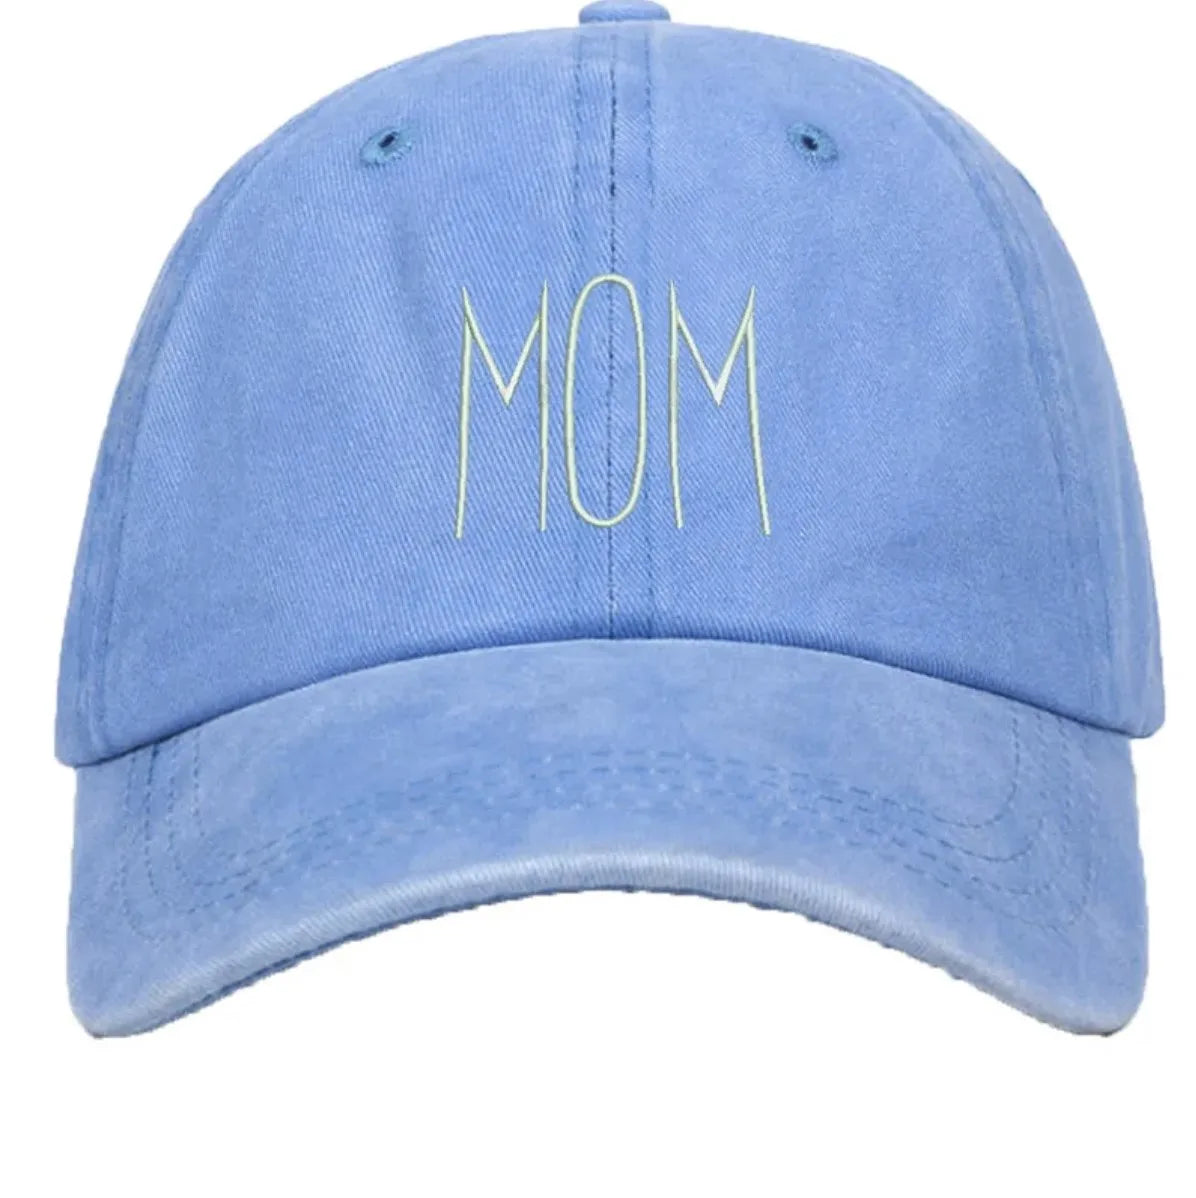 MOM Baseball Hat ( click for colors )